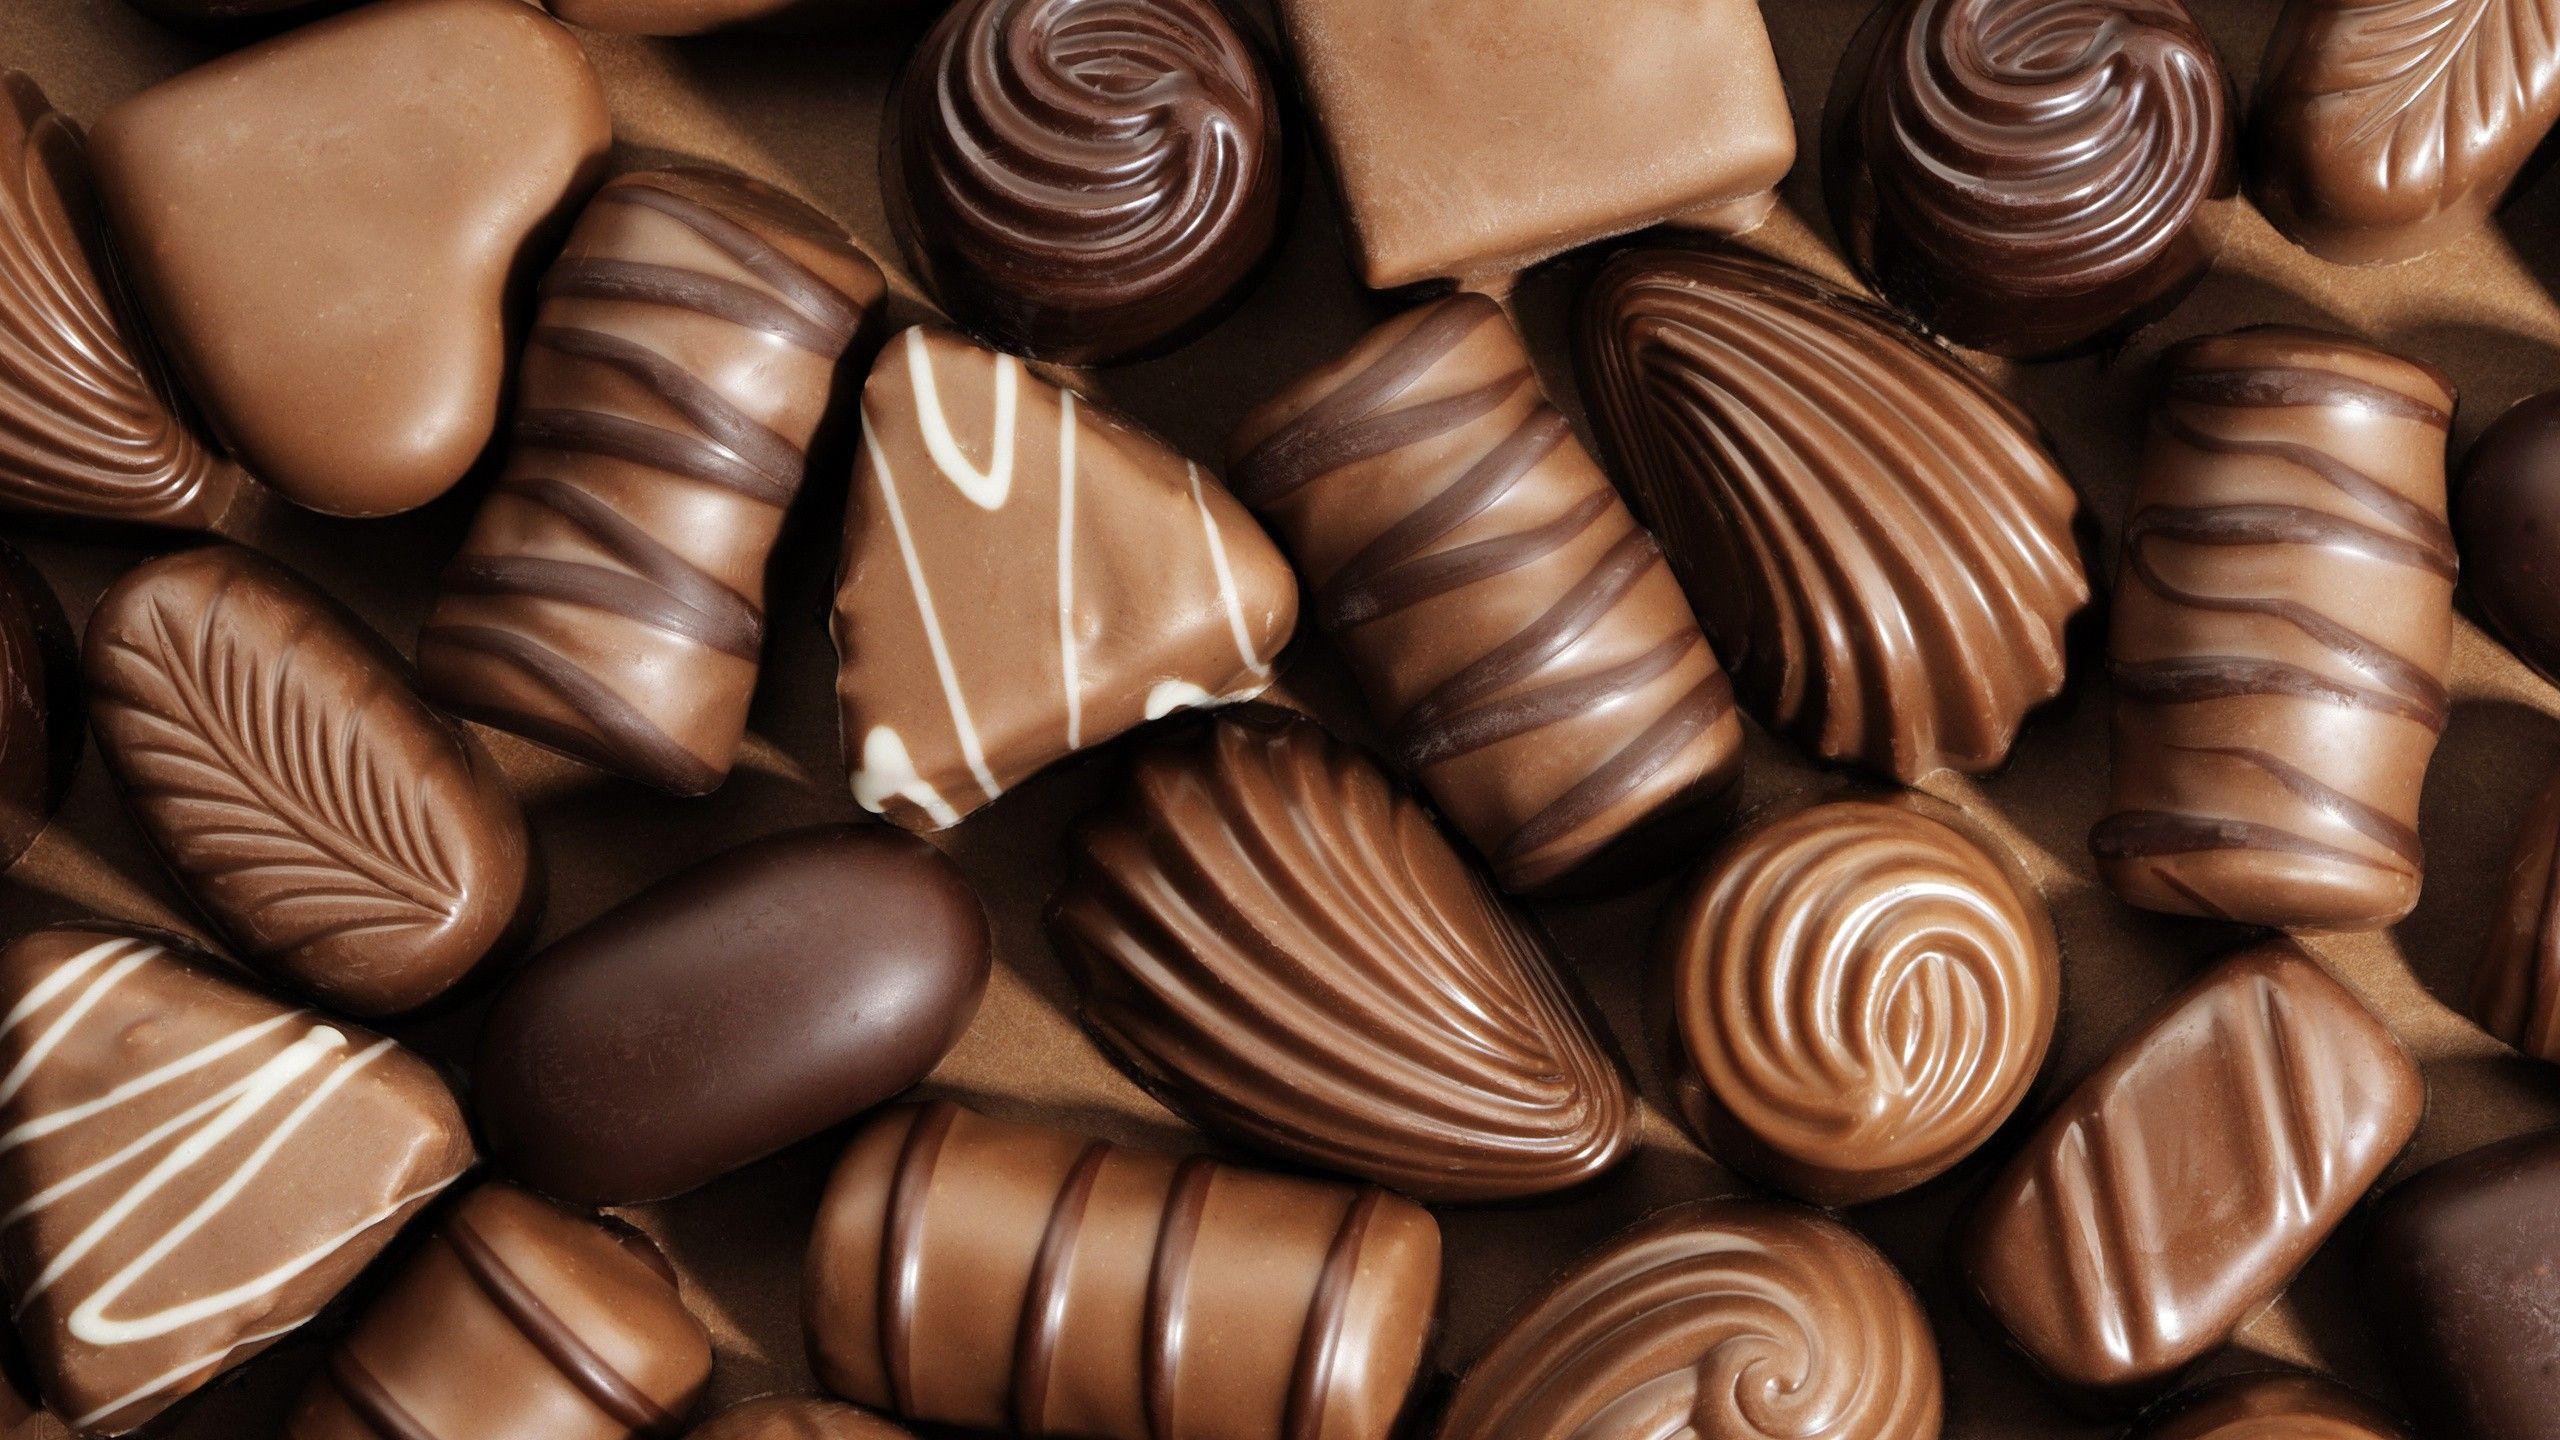 Beautiful chocolates wallpaper and image, picture